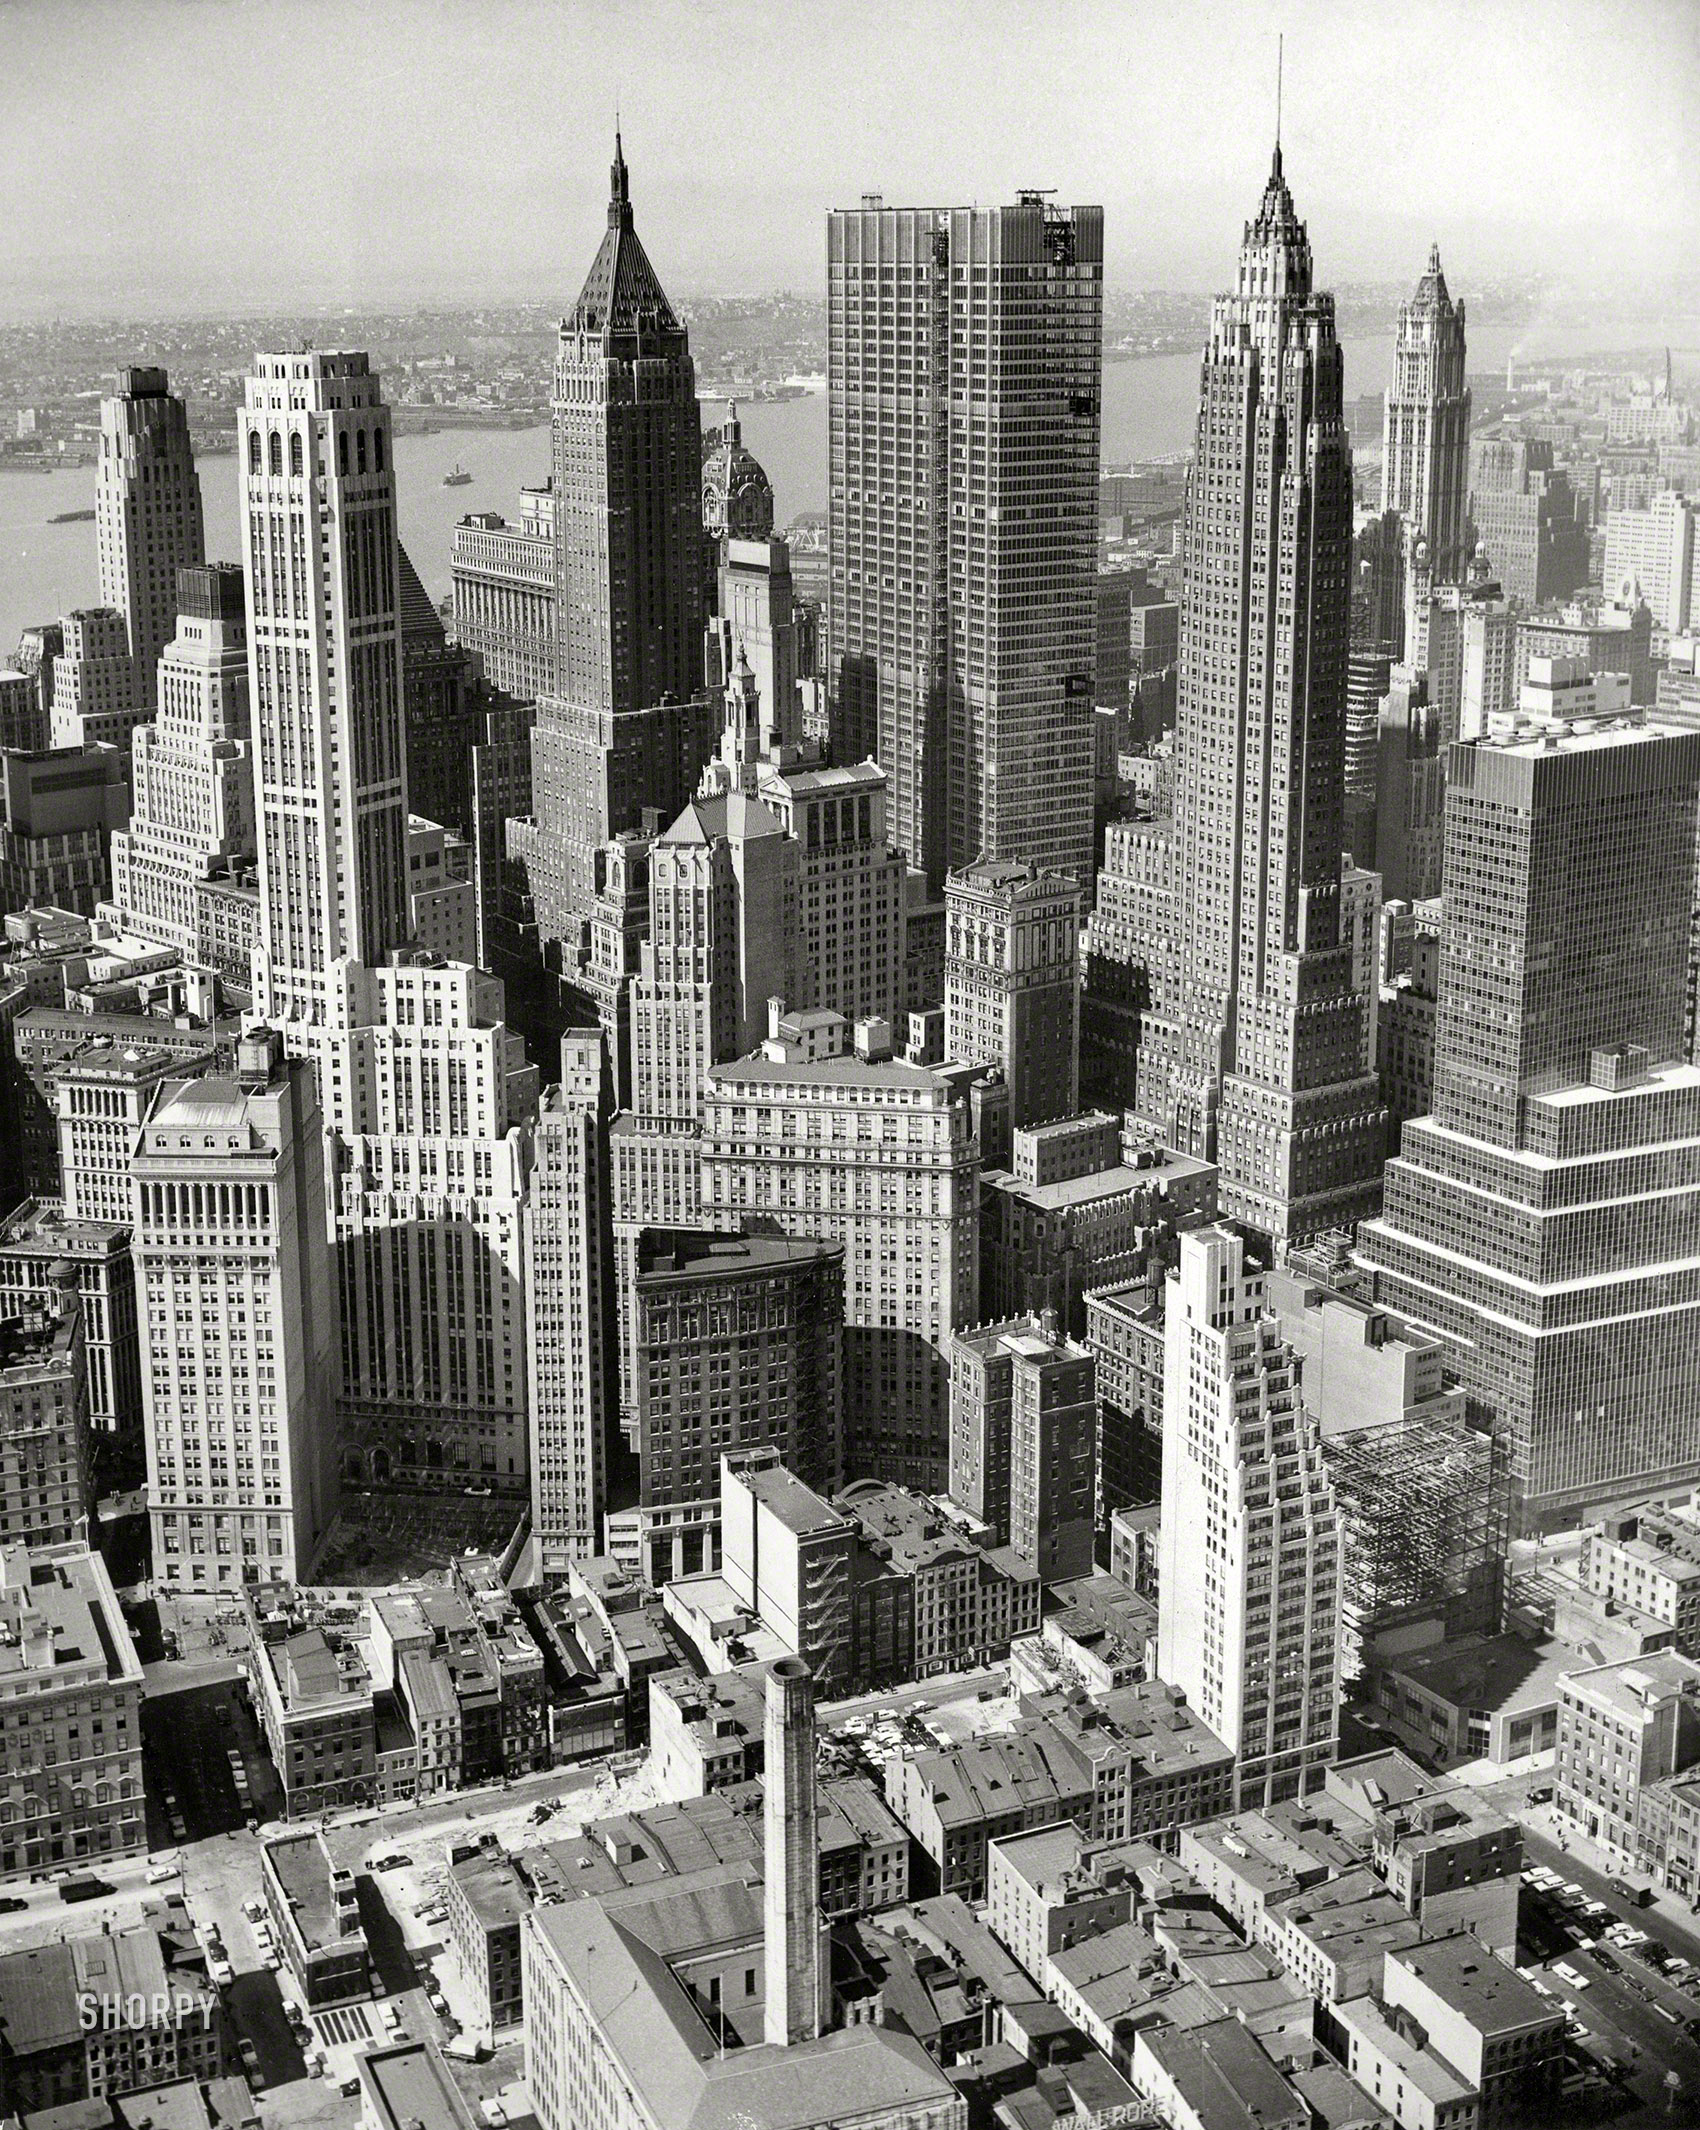 April 15, 1960. "New York City skyline, aerial view of Financial District. Chase Manhattan headquarters under construction." Photo by Al Ravenna for the New York World-Telegram & Sun. View full size.